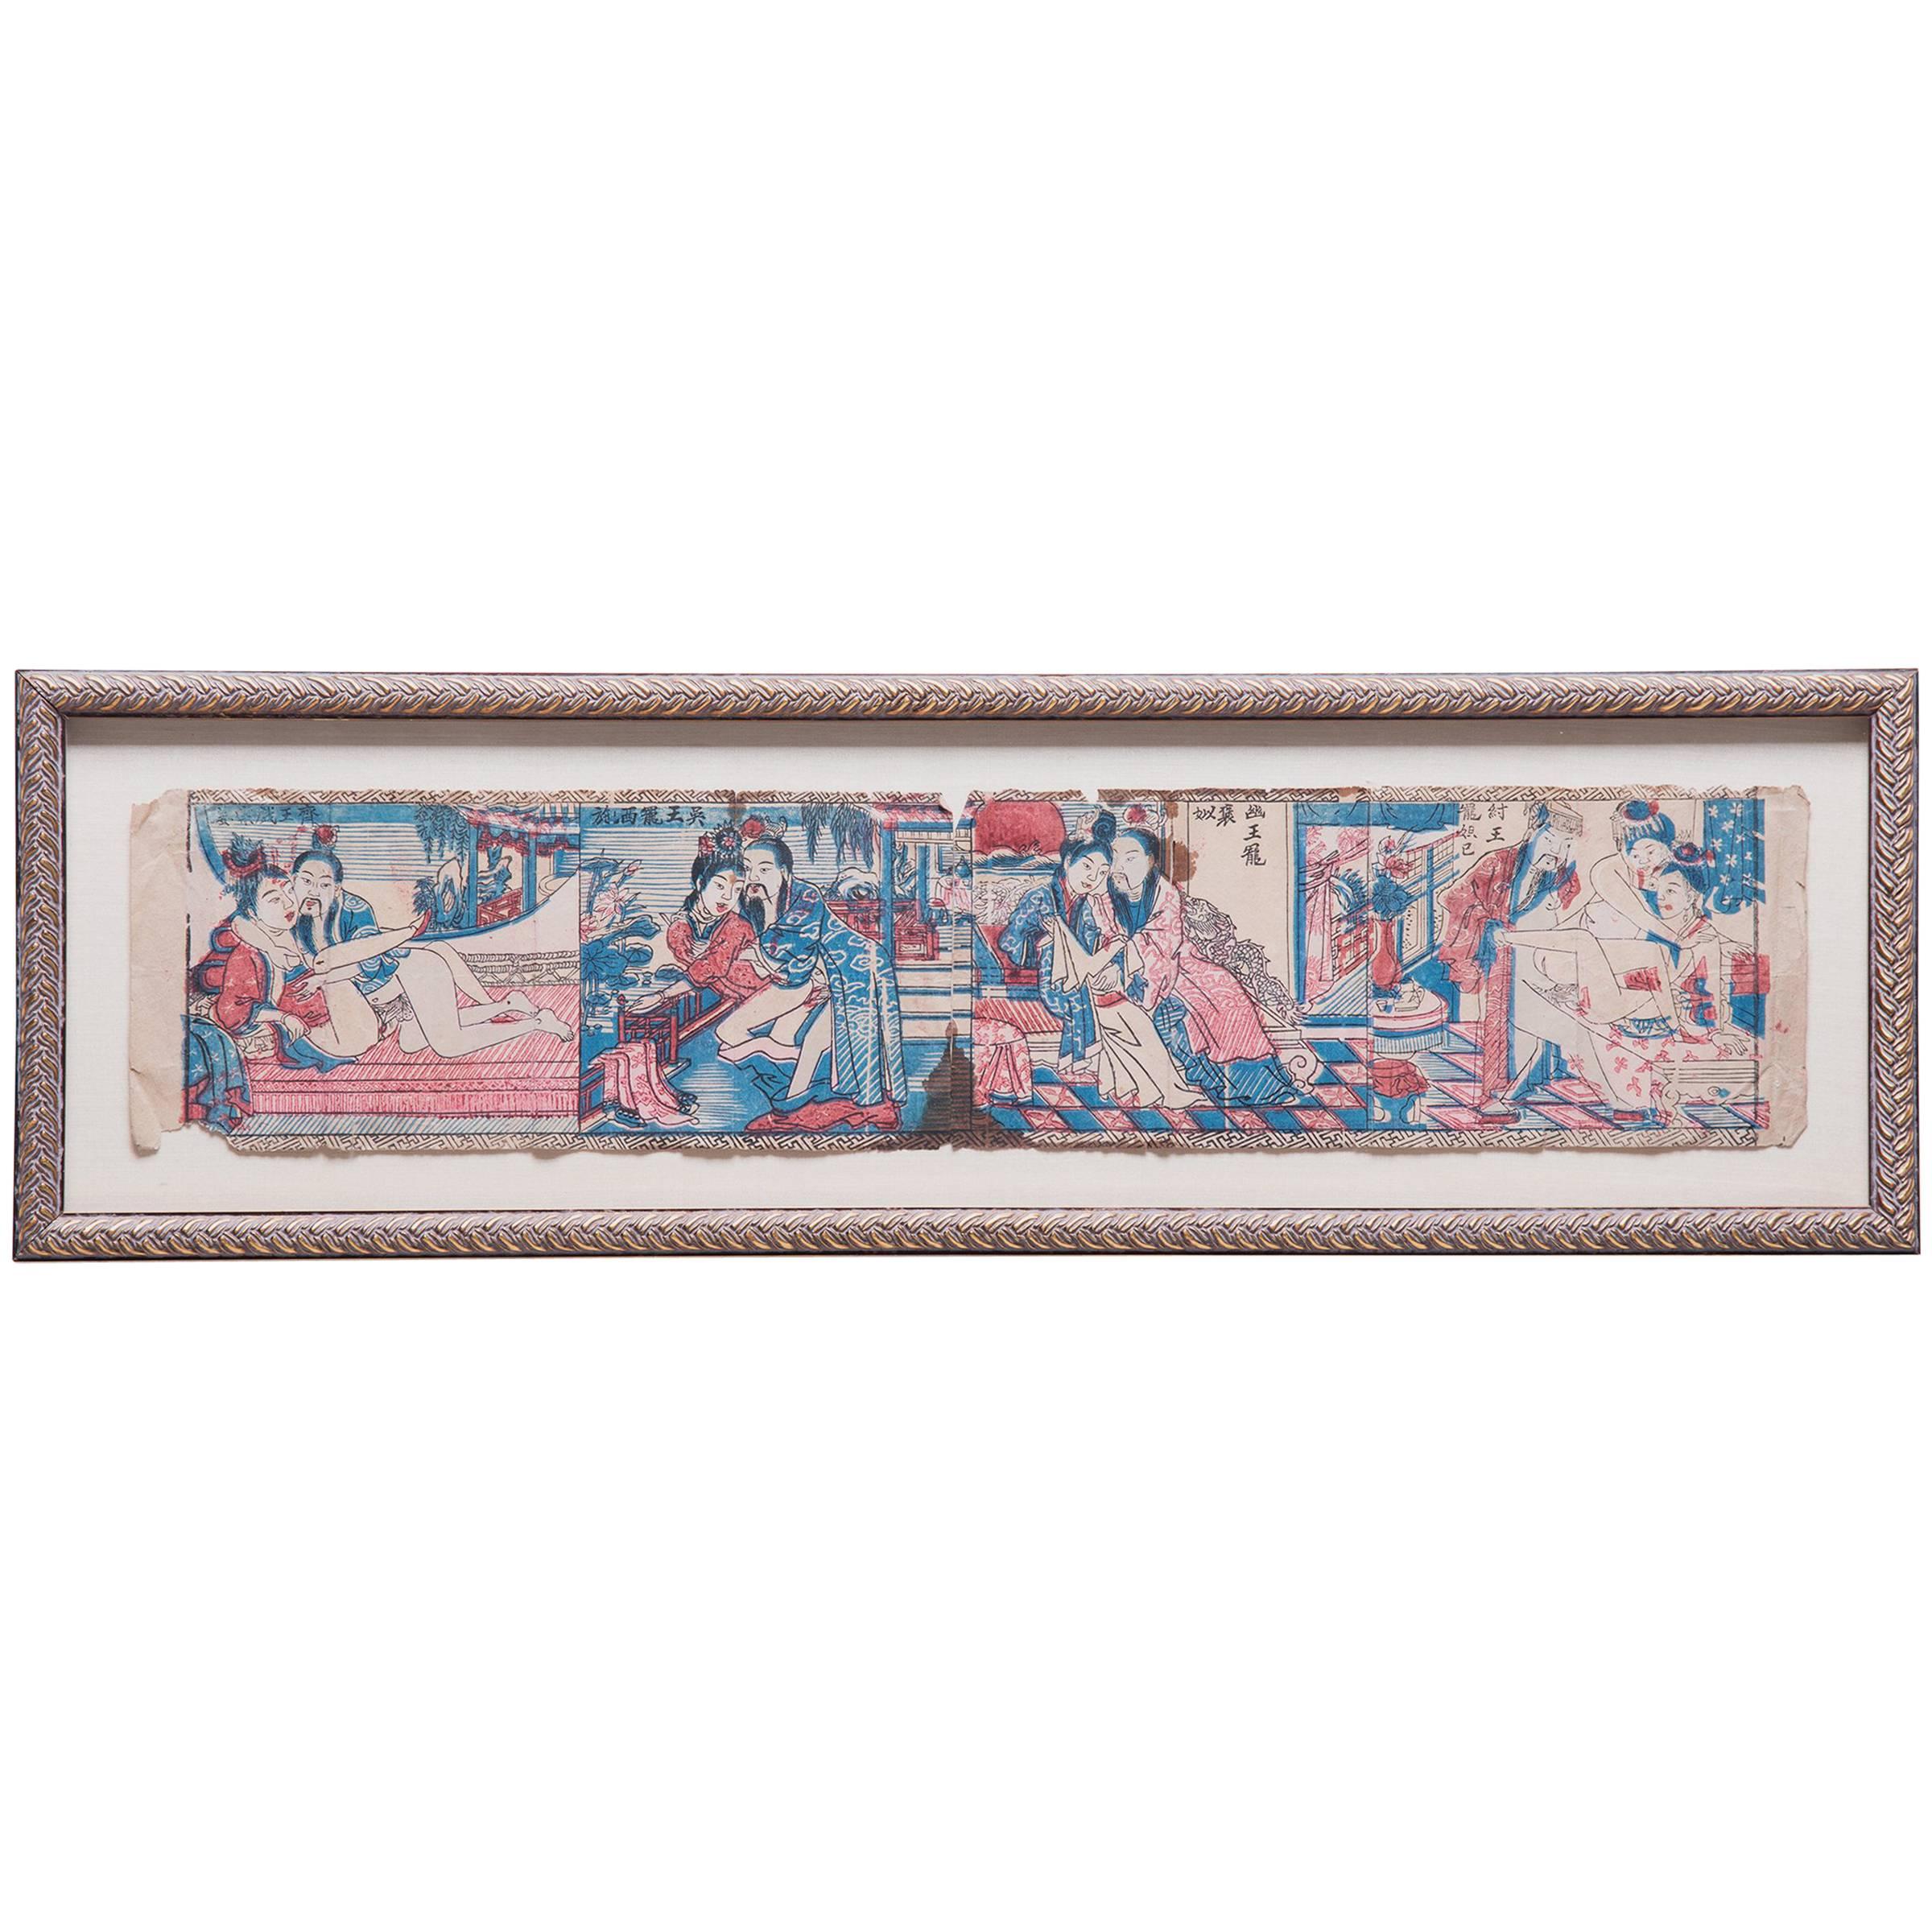 Early 20th Century Chinese Framed Block Print Erotic Pillow Book